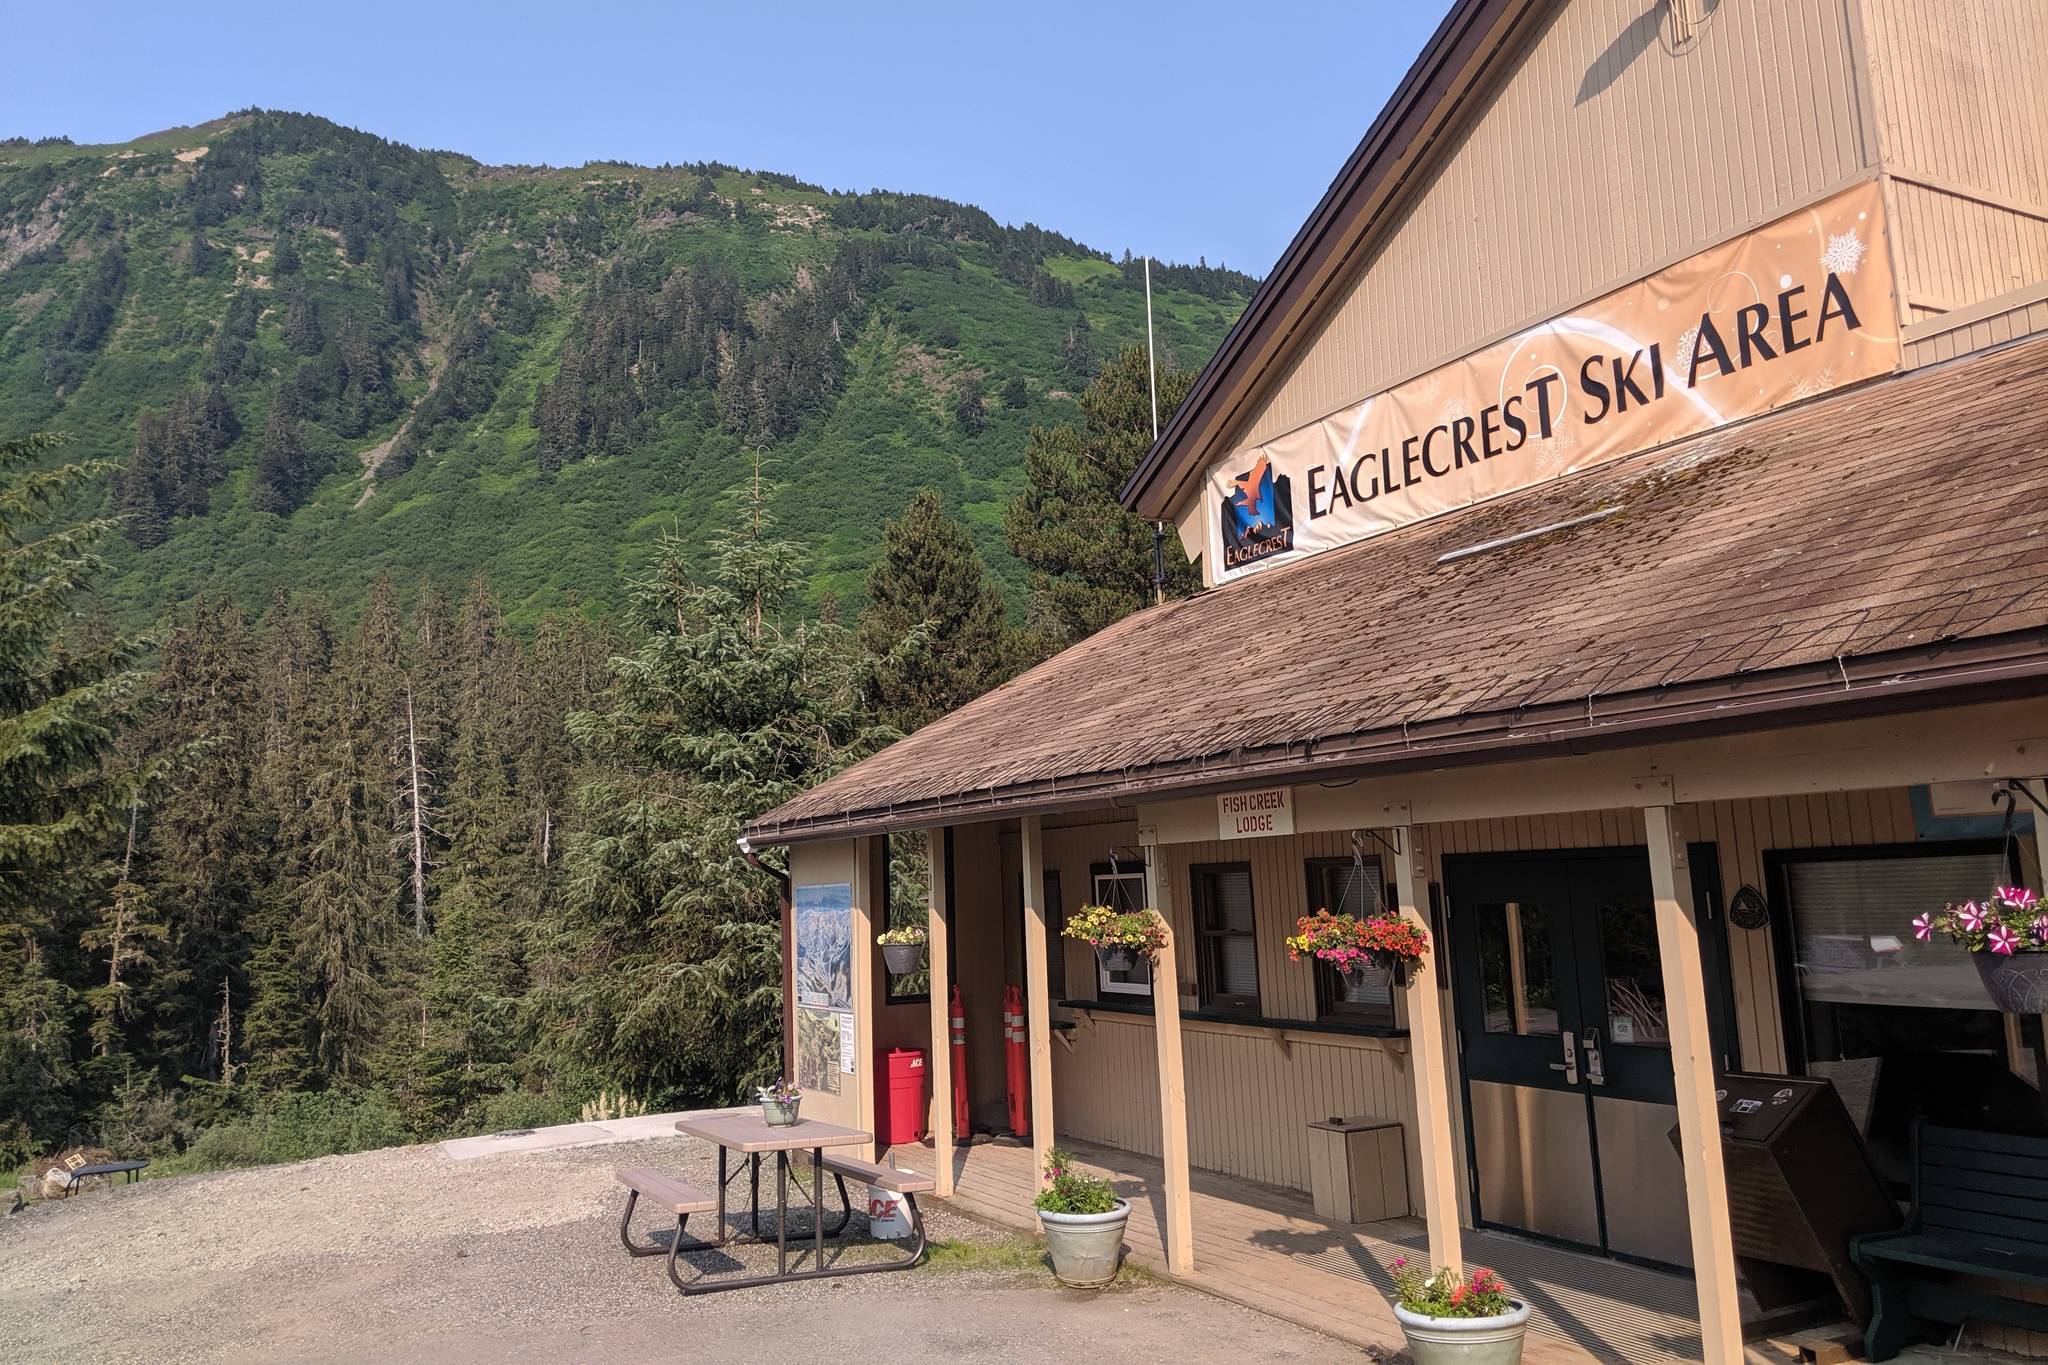 Eaglecrest Ski Area wants to expand its summer offerings and is hosting a meeting for North Douglas Neighborhood Association. (Ben Hohenstatt | Juneau Empire)